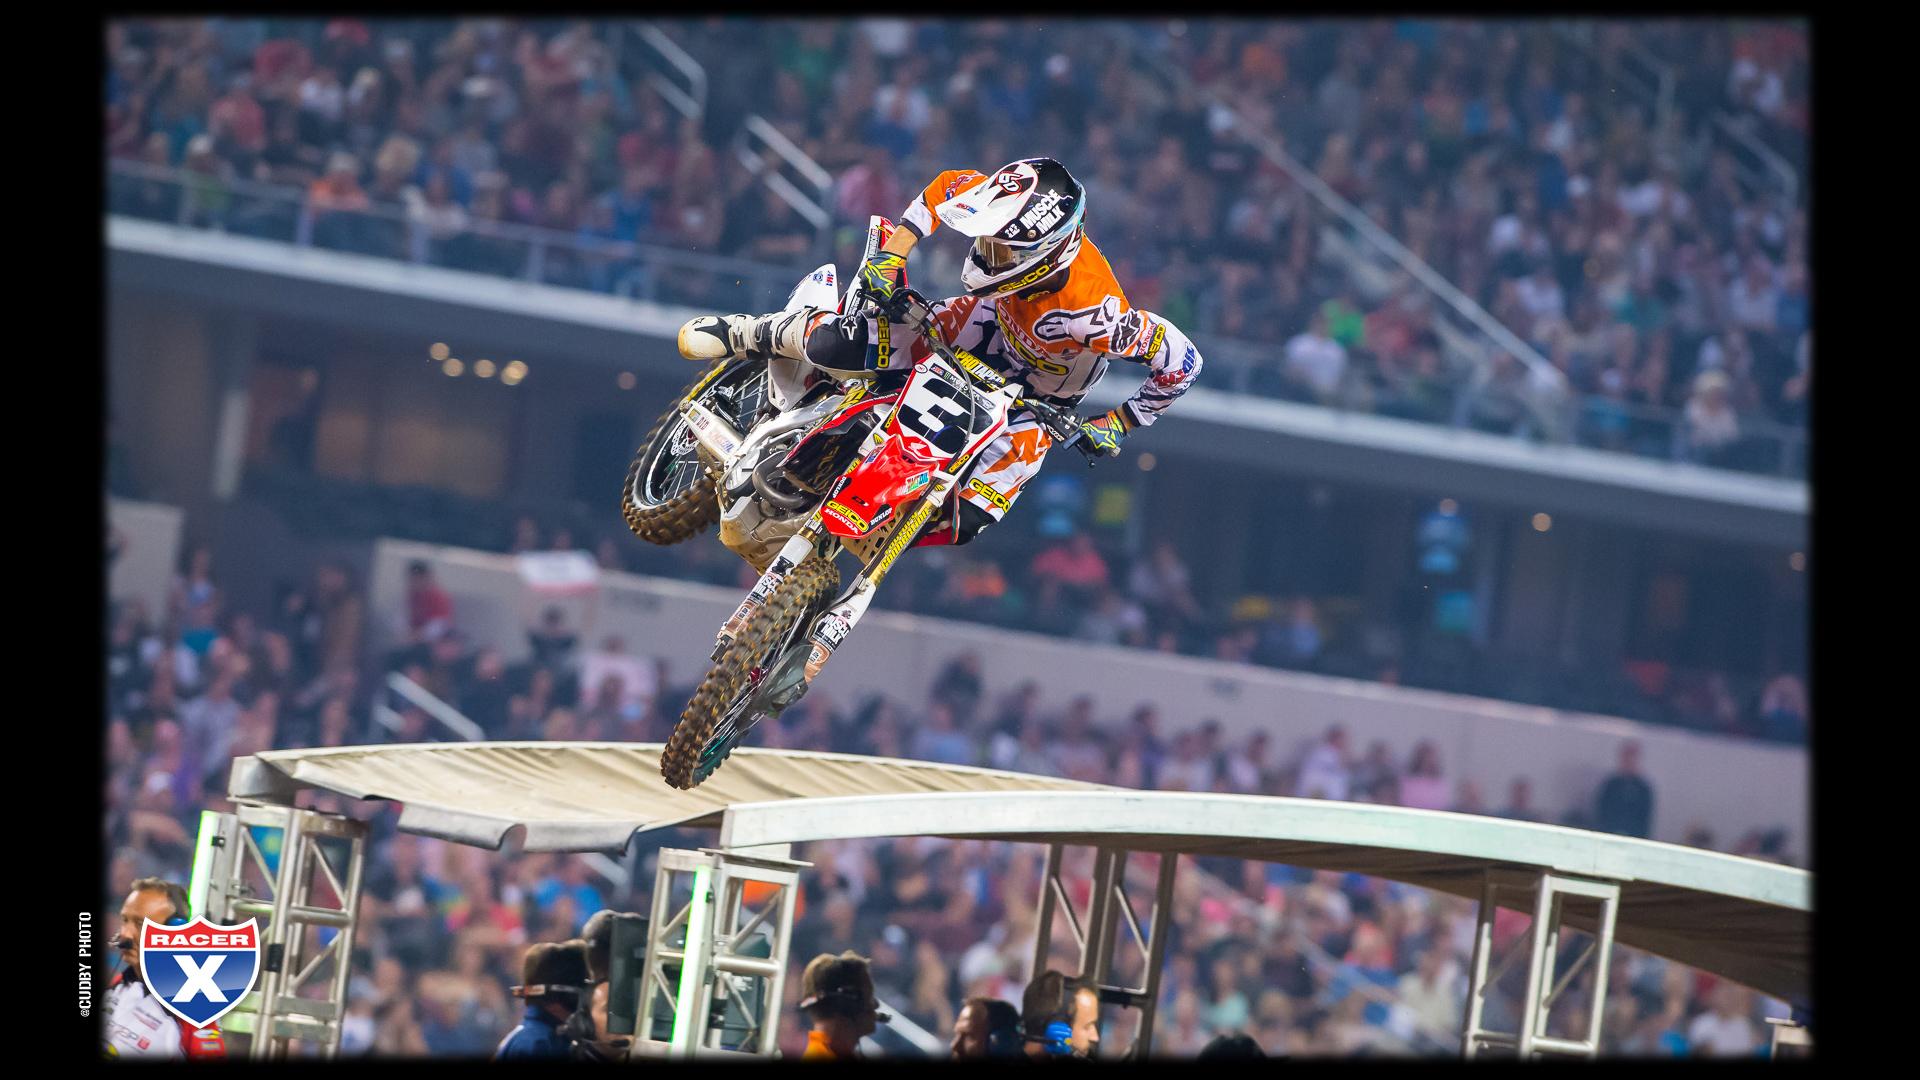 What Was The Biggest Surprise Of 250sx East Region Opener Mon Feb